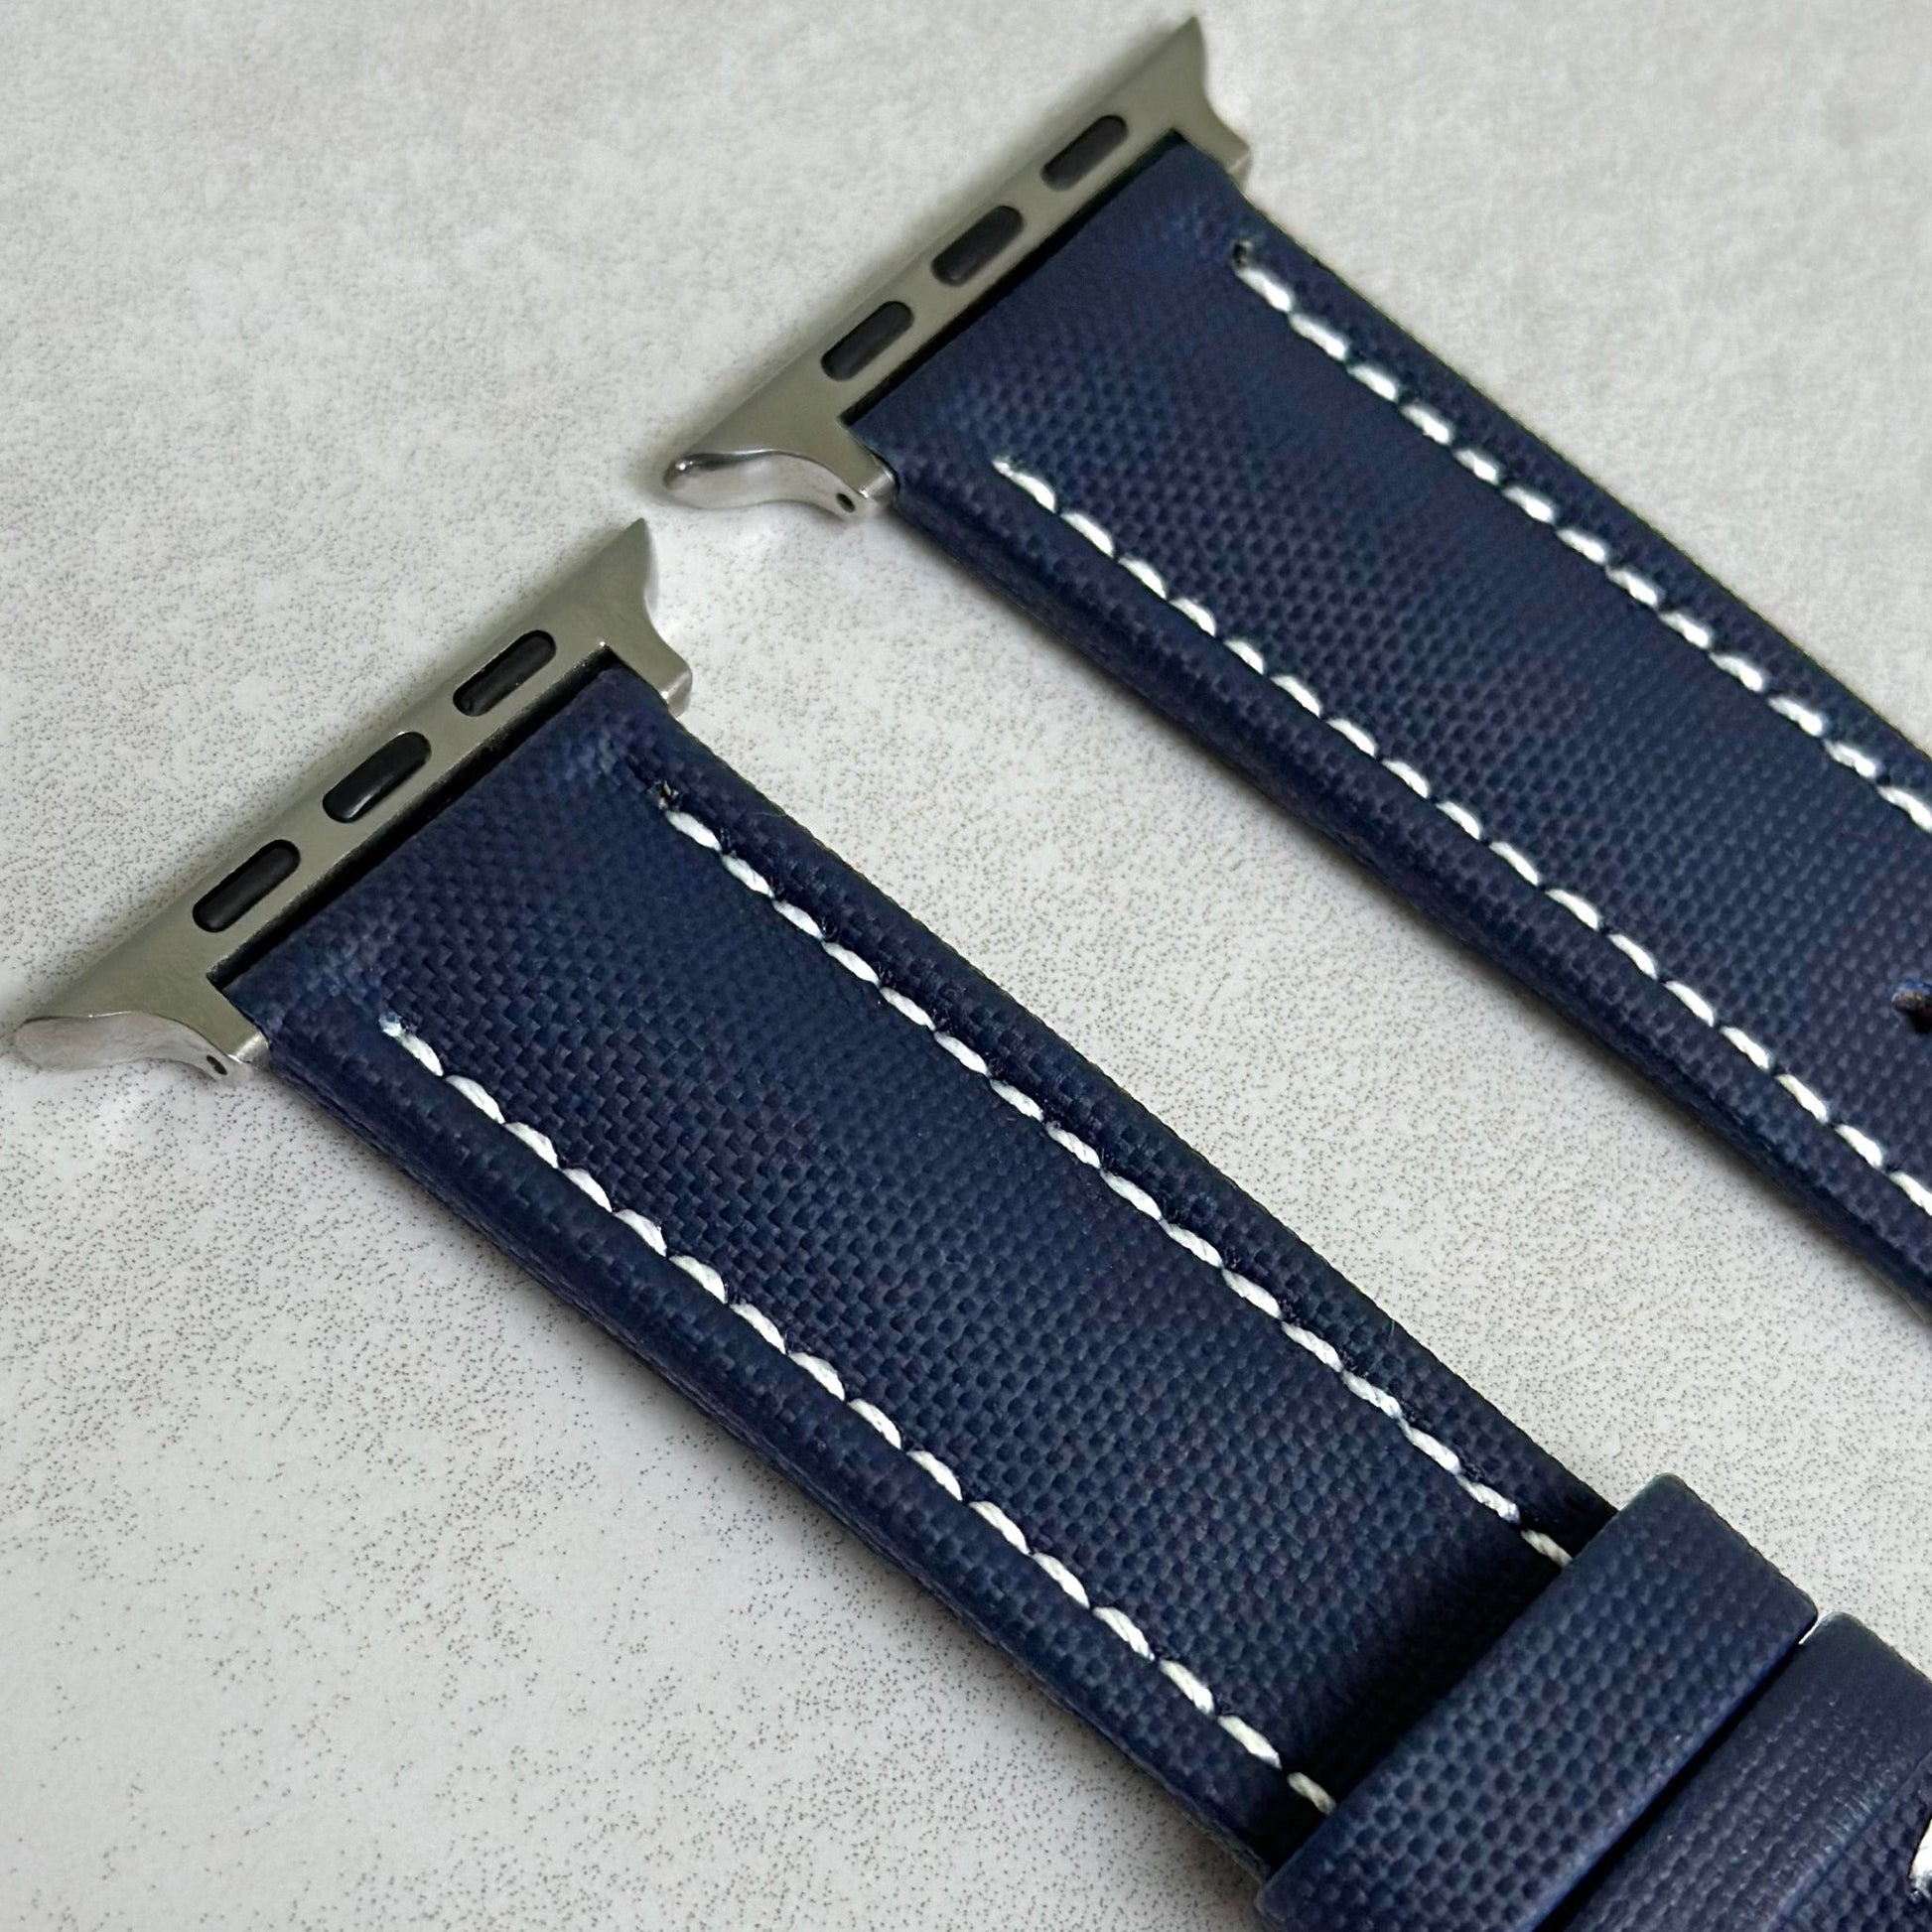 Top of the Bermuda navy blue sail cloth Apple Watch strap with white stitching. Watch And Strap